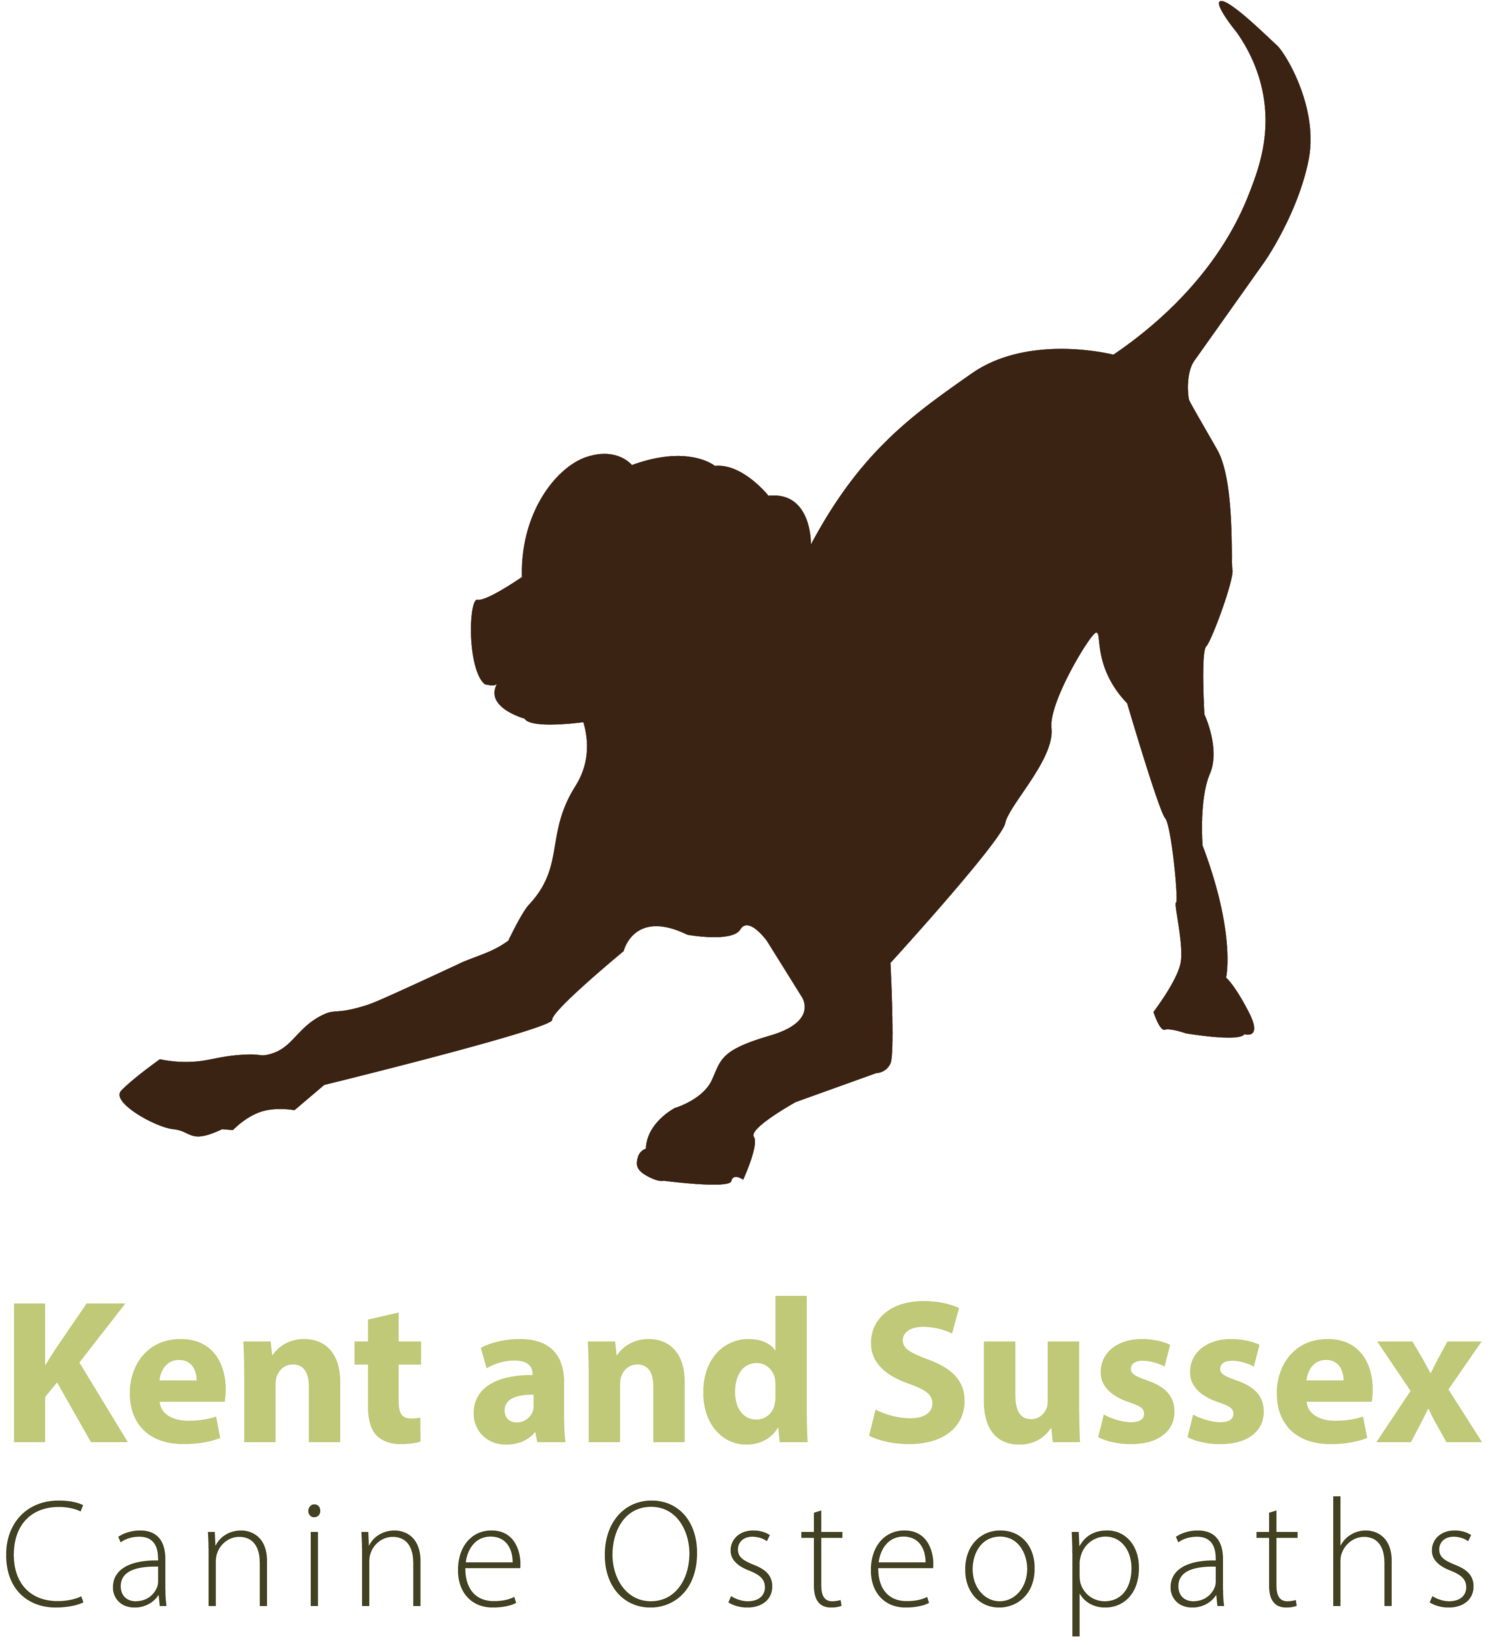 Kent and Sussex Canine Osteopathy